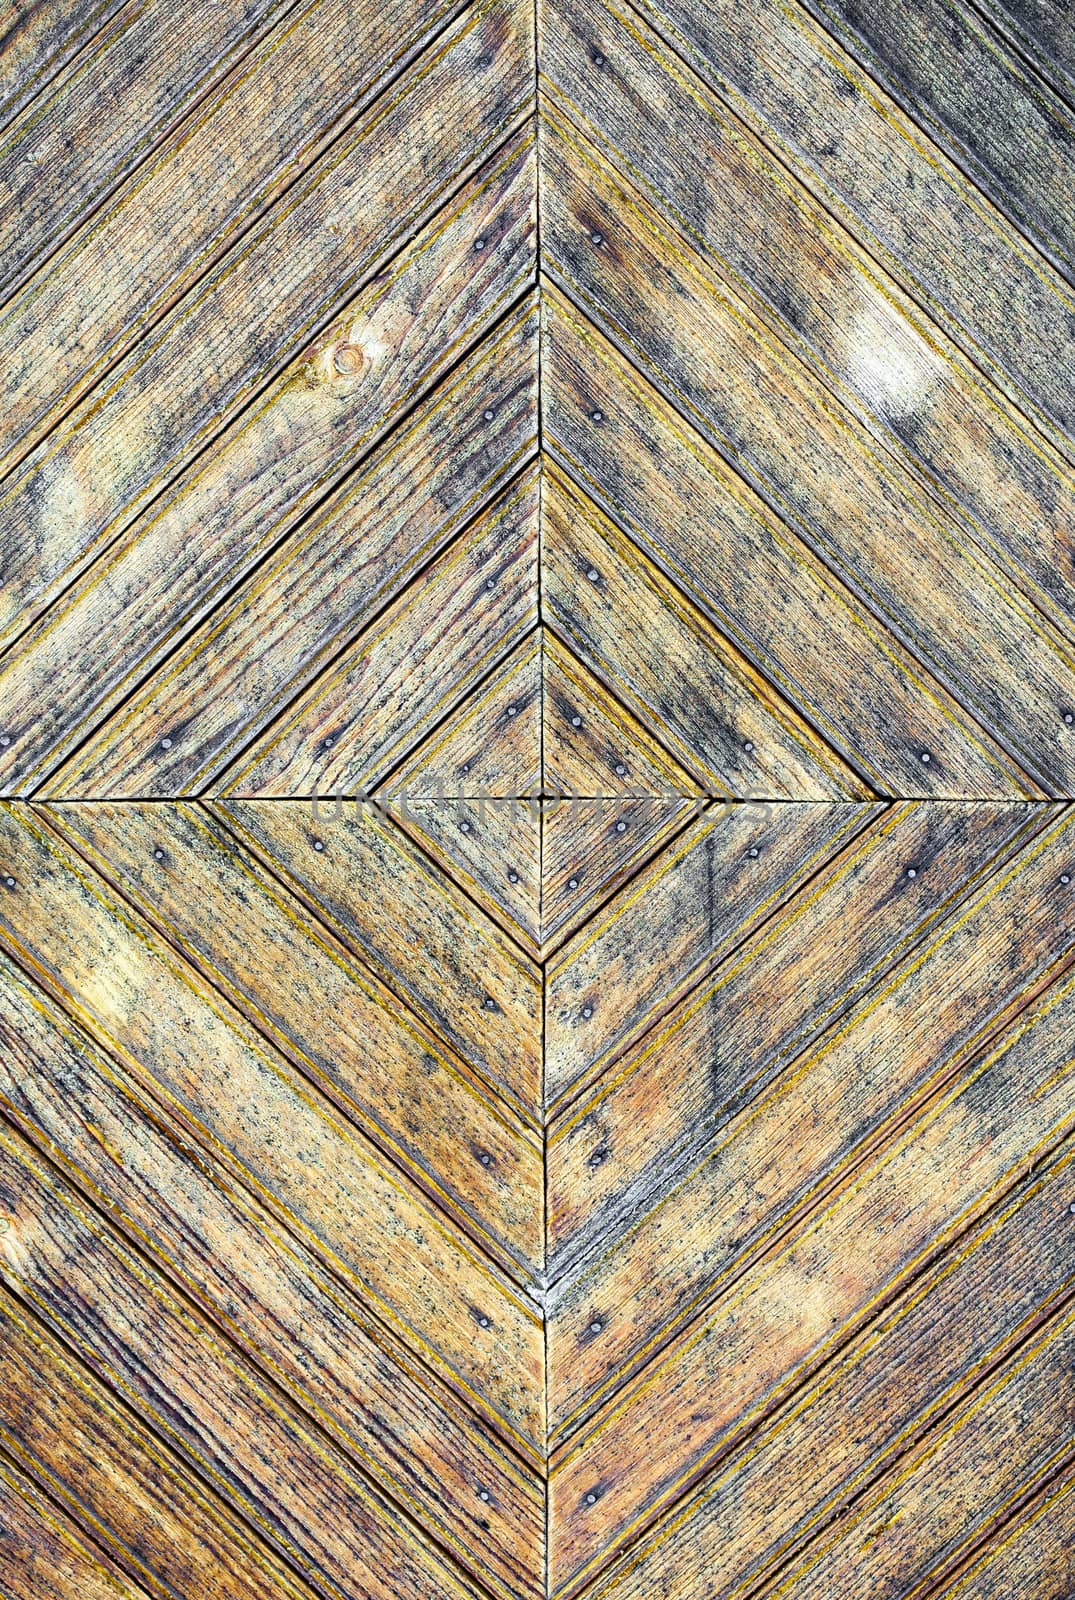 Texture of old stained wooden door by sfinks